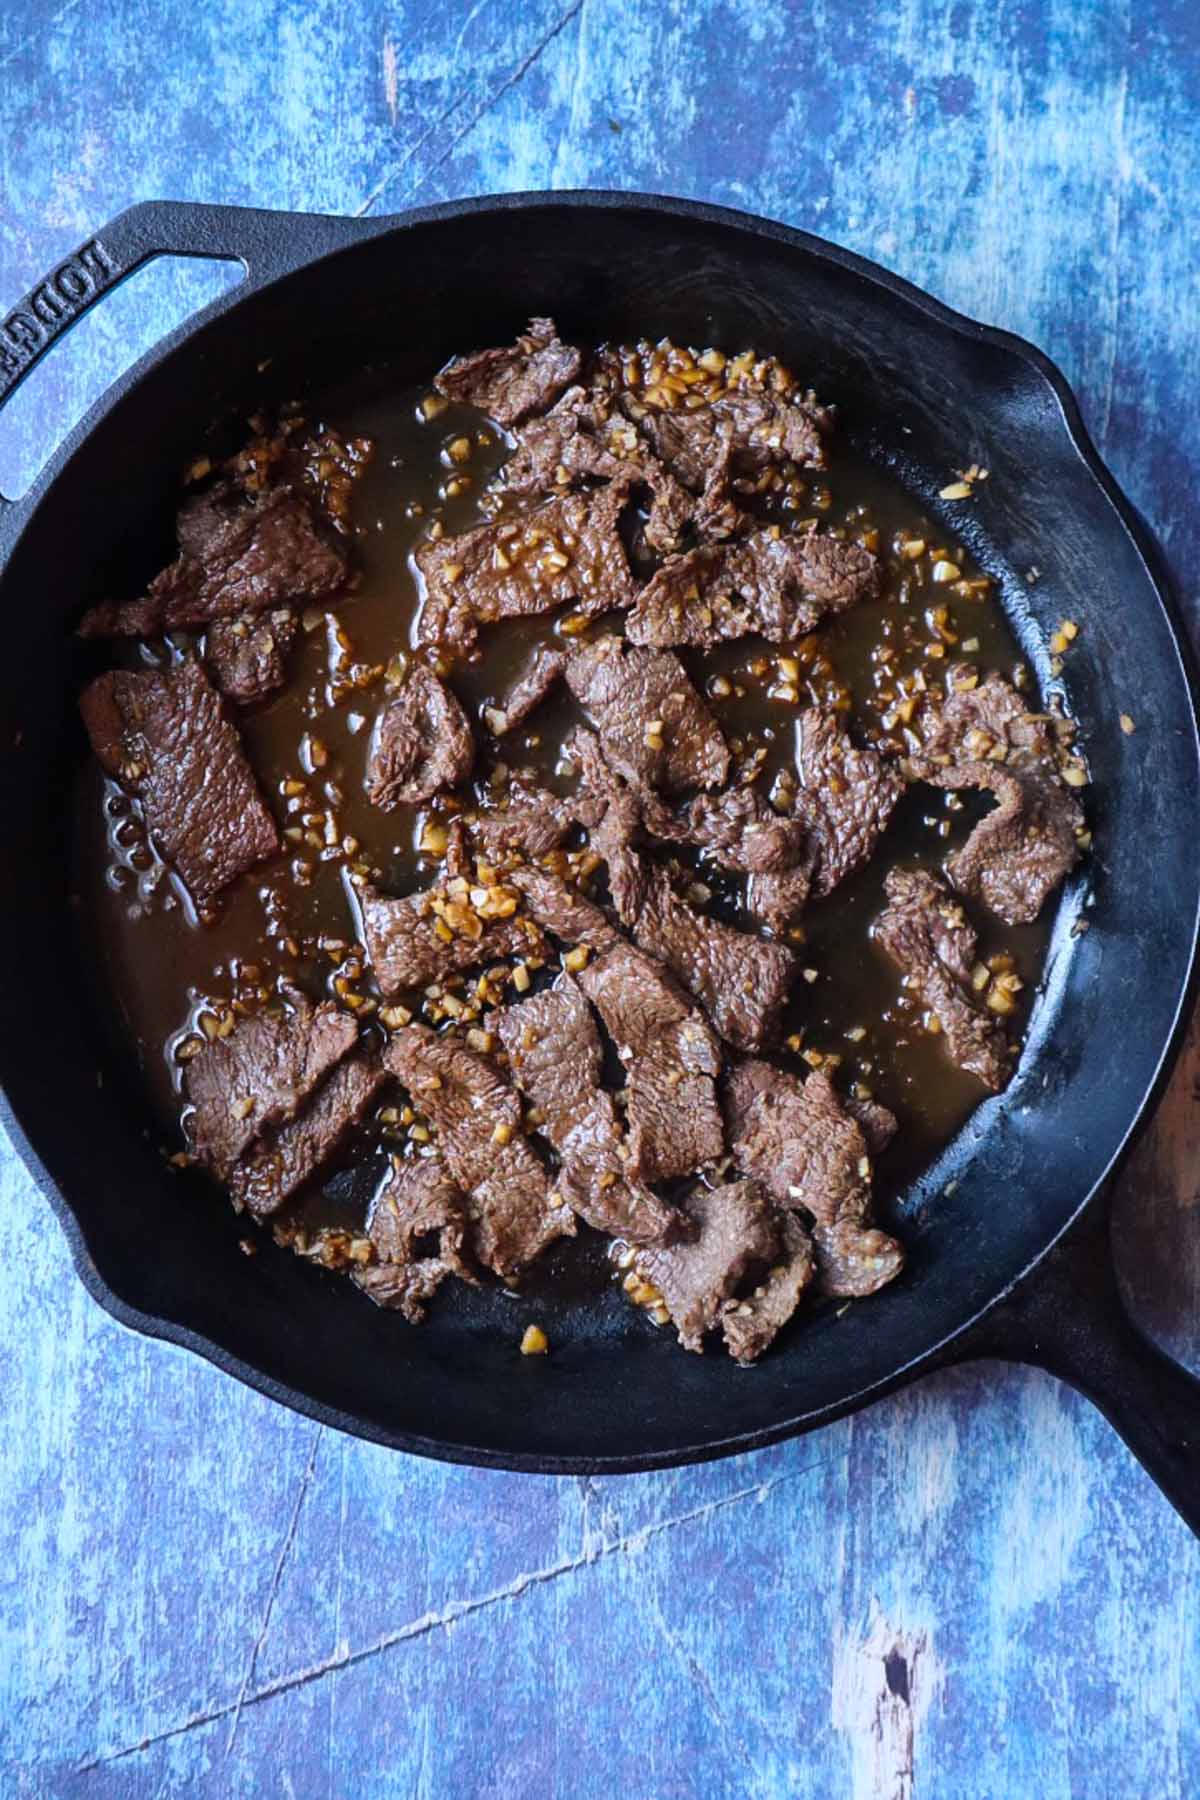 cast iron skillet with sliced steak cooked in a garlic stir fry sauce